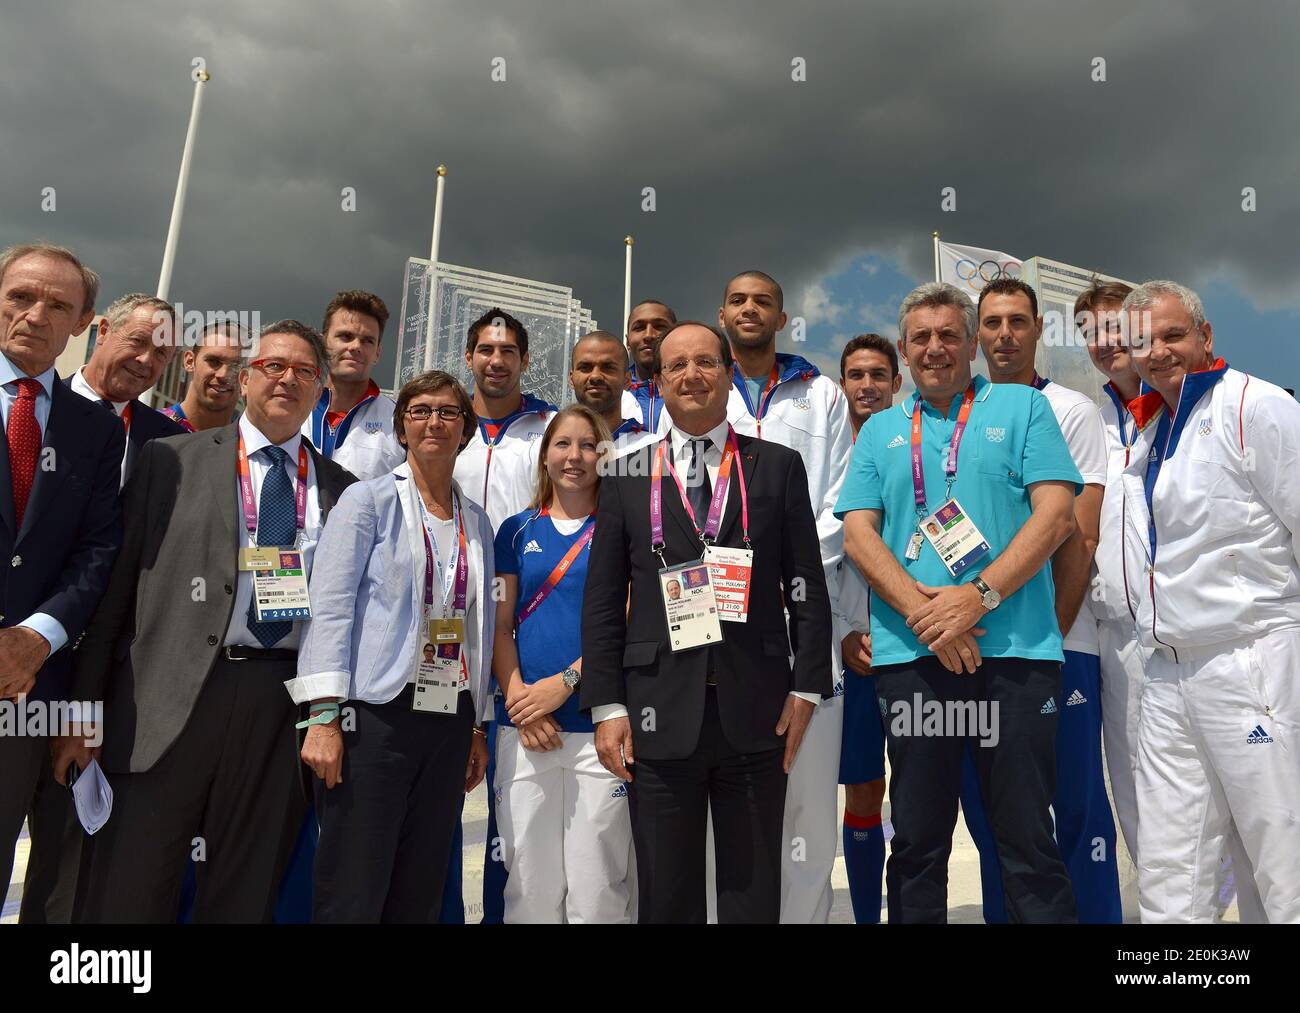 French President Francois Hollande (C) and French Sports Minister Valerie Fourneyron (3rdL) pose with French athletes Nikola Karabatic (6thL), silver medalist Celine Goberville (2ndL), baskettball players Tony Parker (C 2nd row)) and Nicolas Batum (6thR) and handball headcoach Claude Onesta (4thR) on July 30, 2012 at Olympic village in London, during the London 2012 Olympic Games. Photo by Gabriel Bouys/Pool/ABACAPRESS.COM Stock Photo